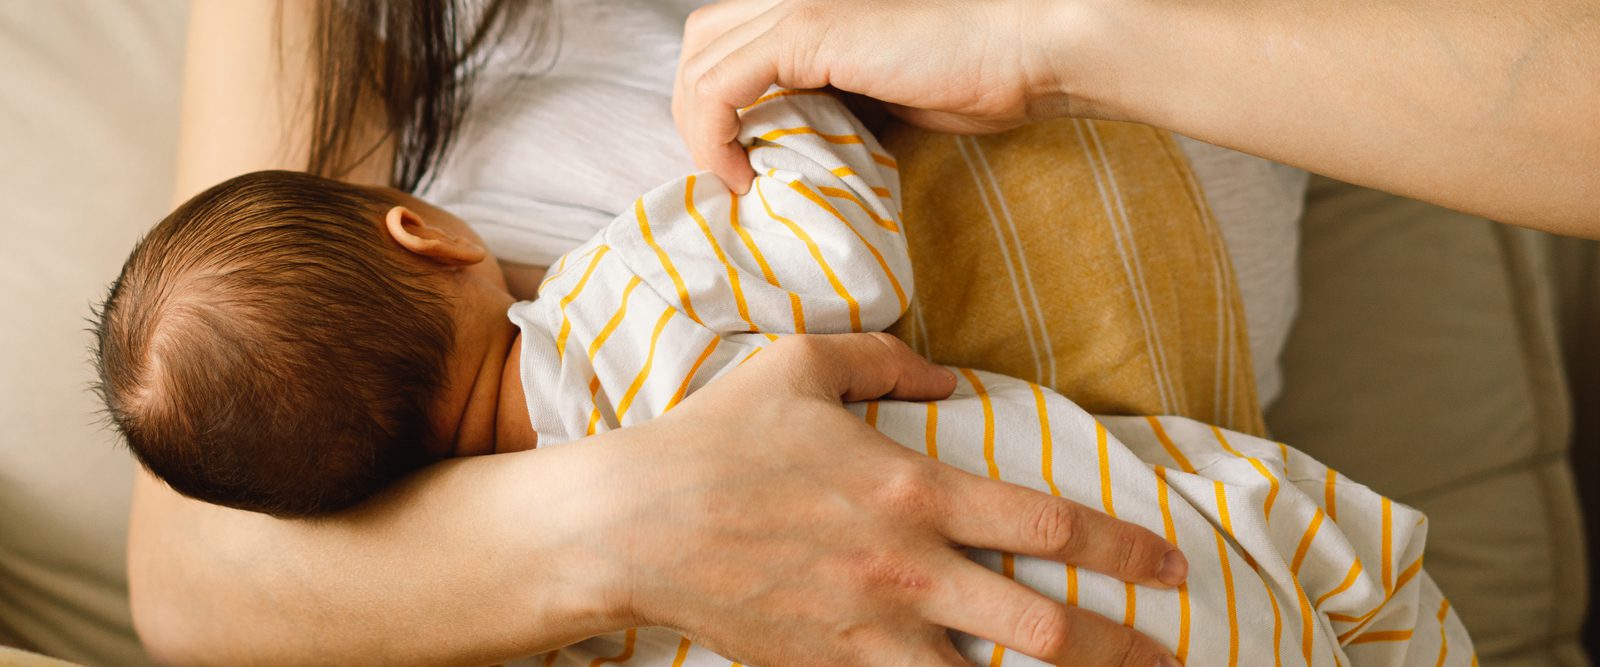 What is chestfeeding and why is it important?